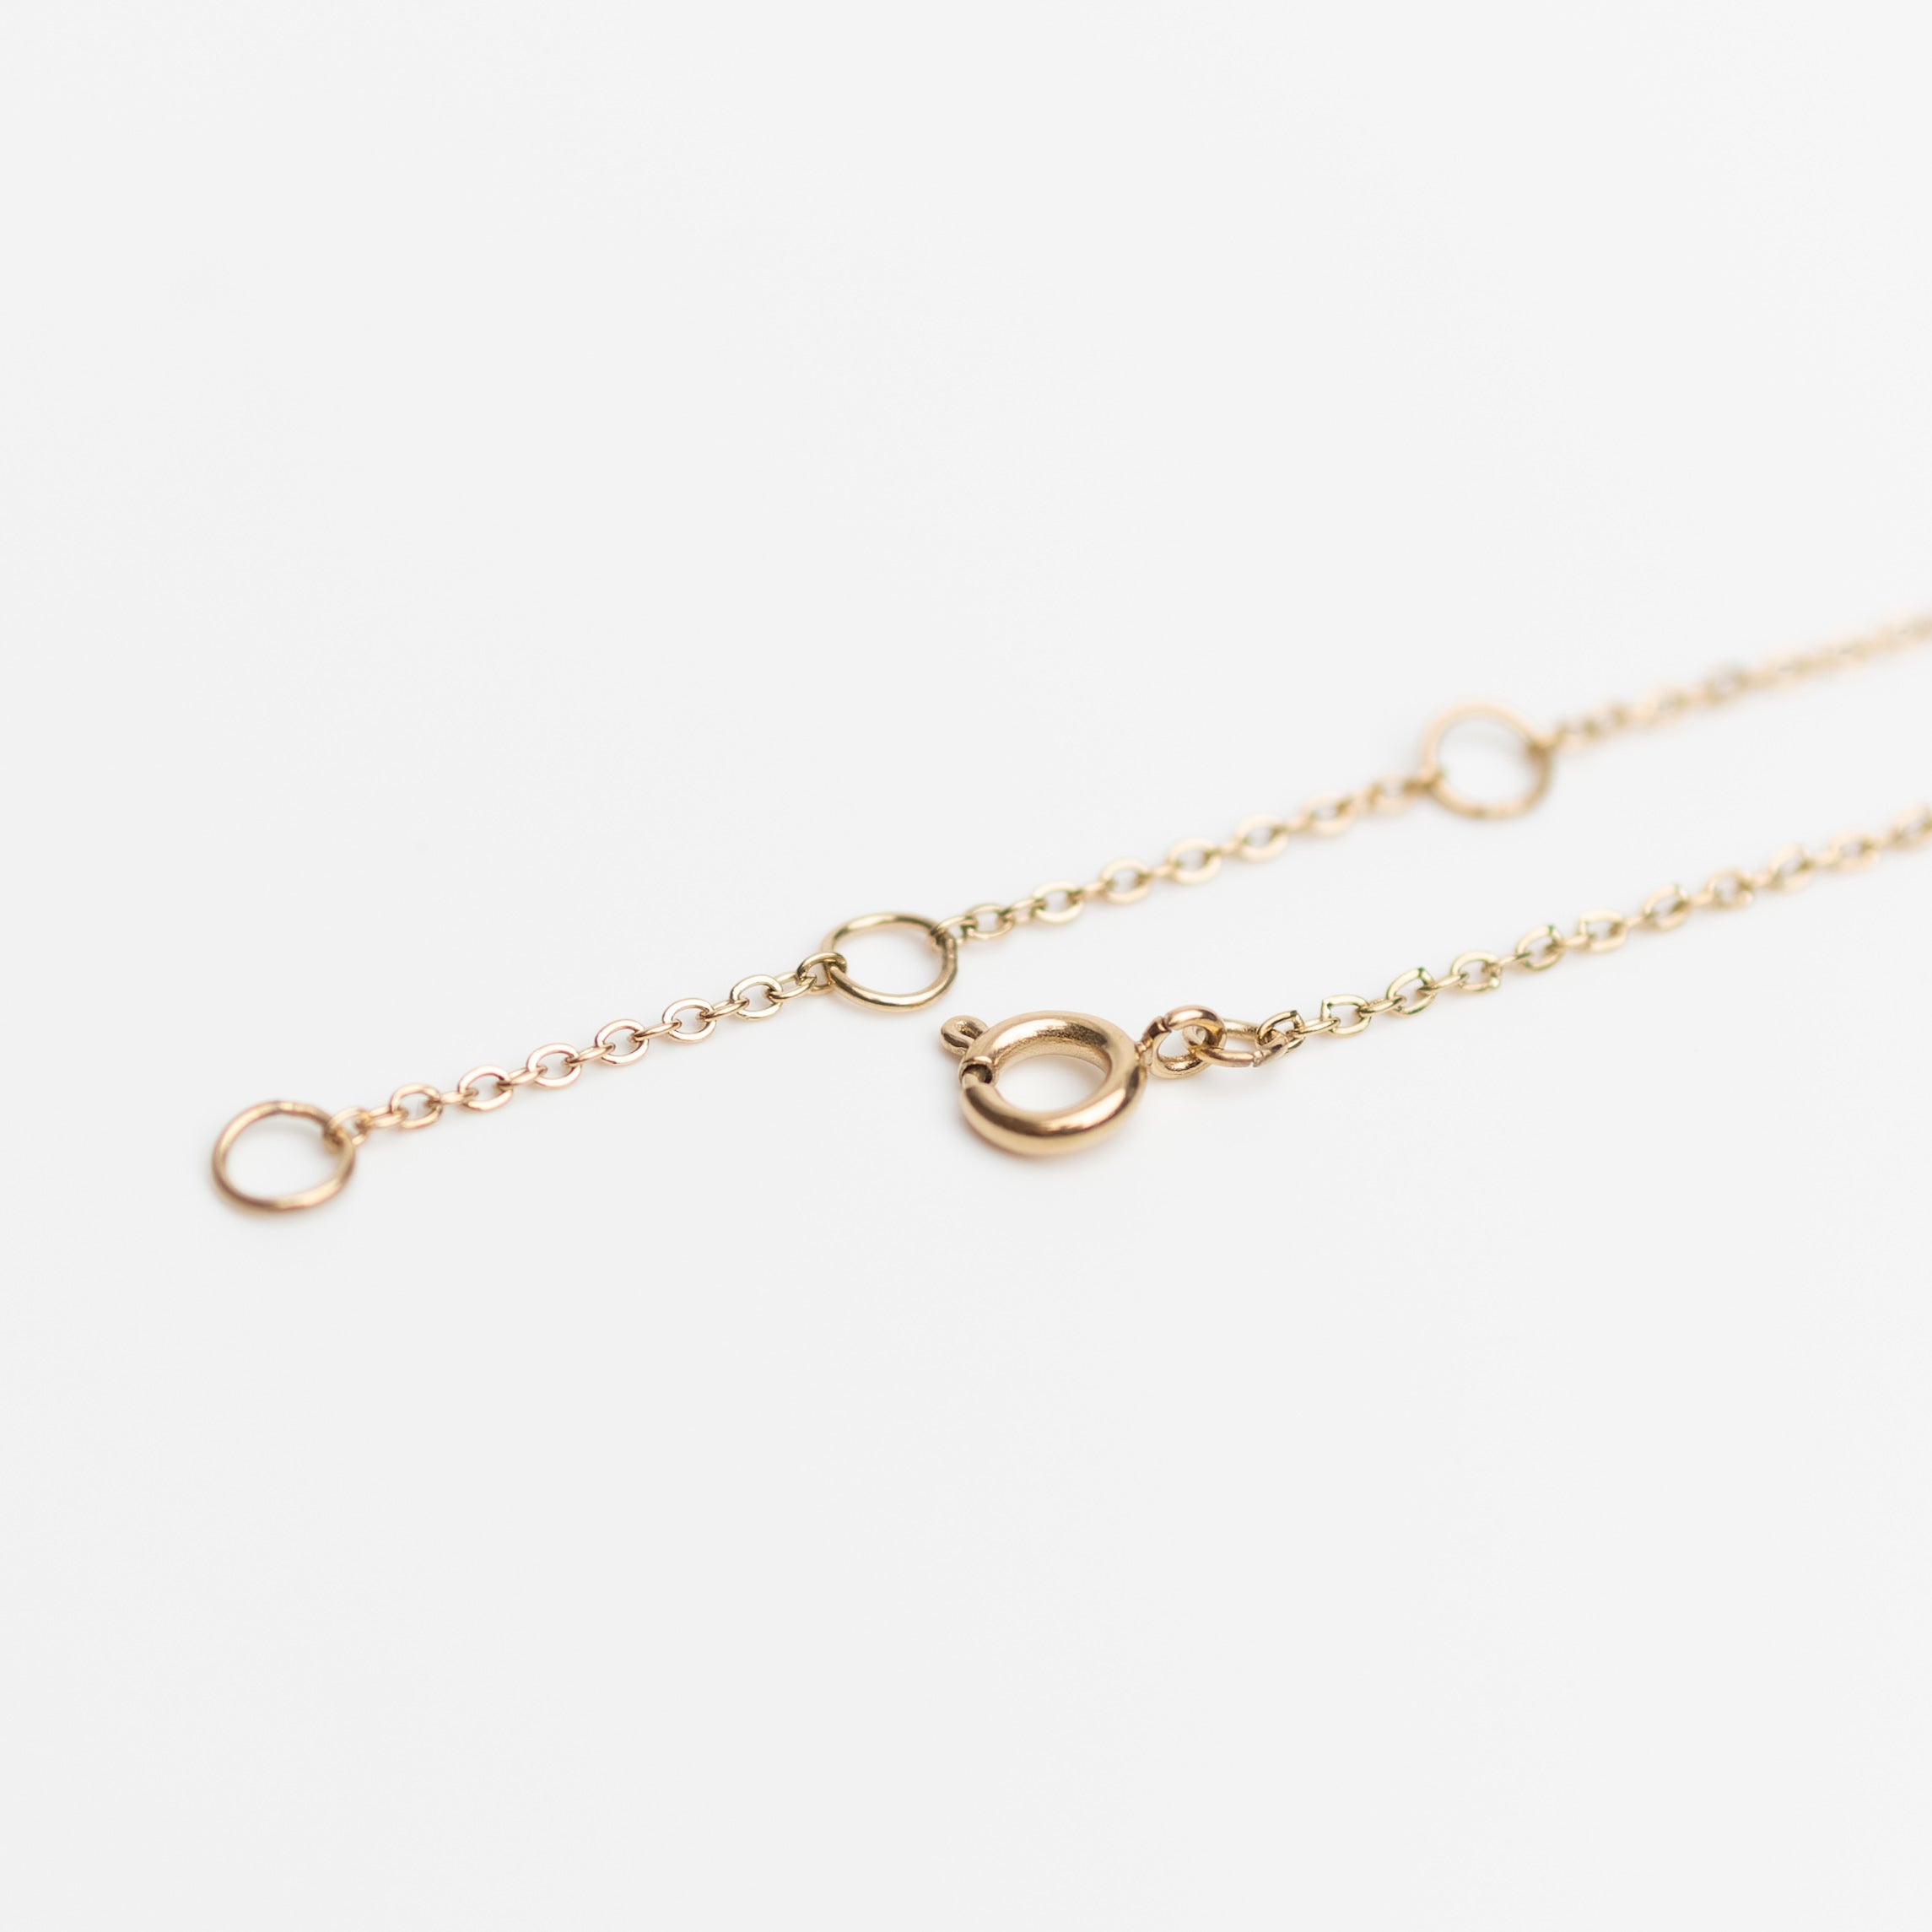 Nº4 - Stainless Steel 14K gold plated necklace - Zafeer